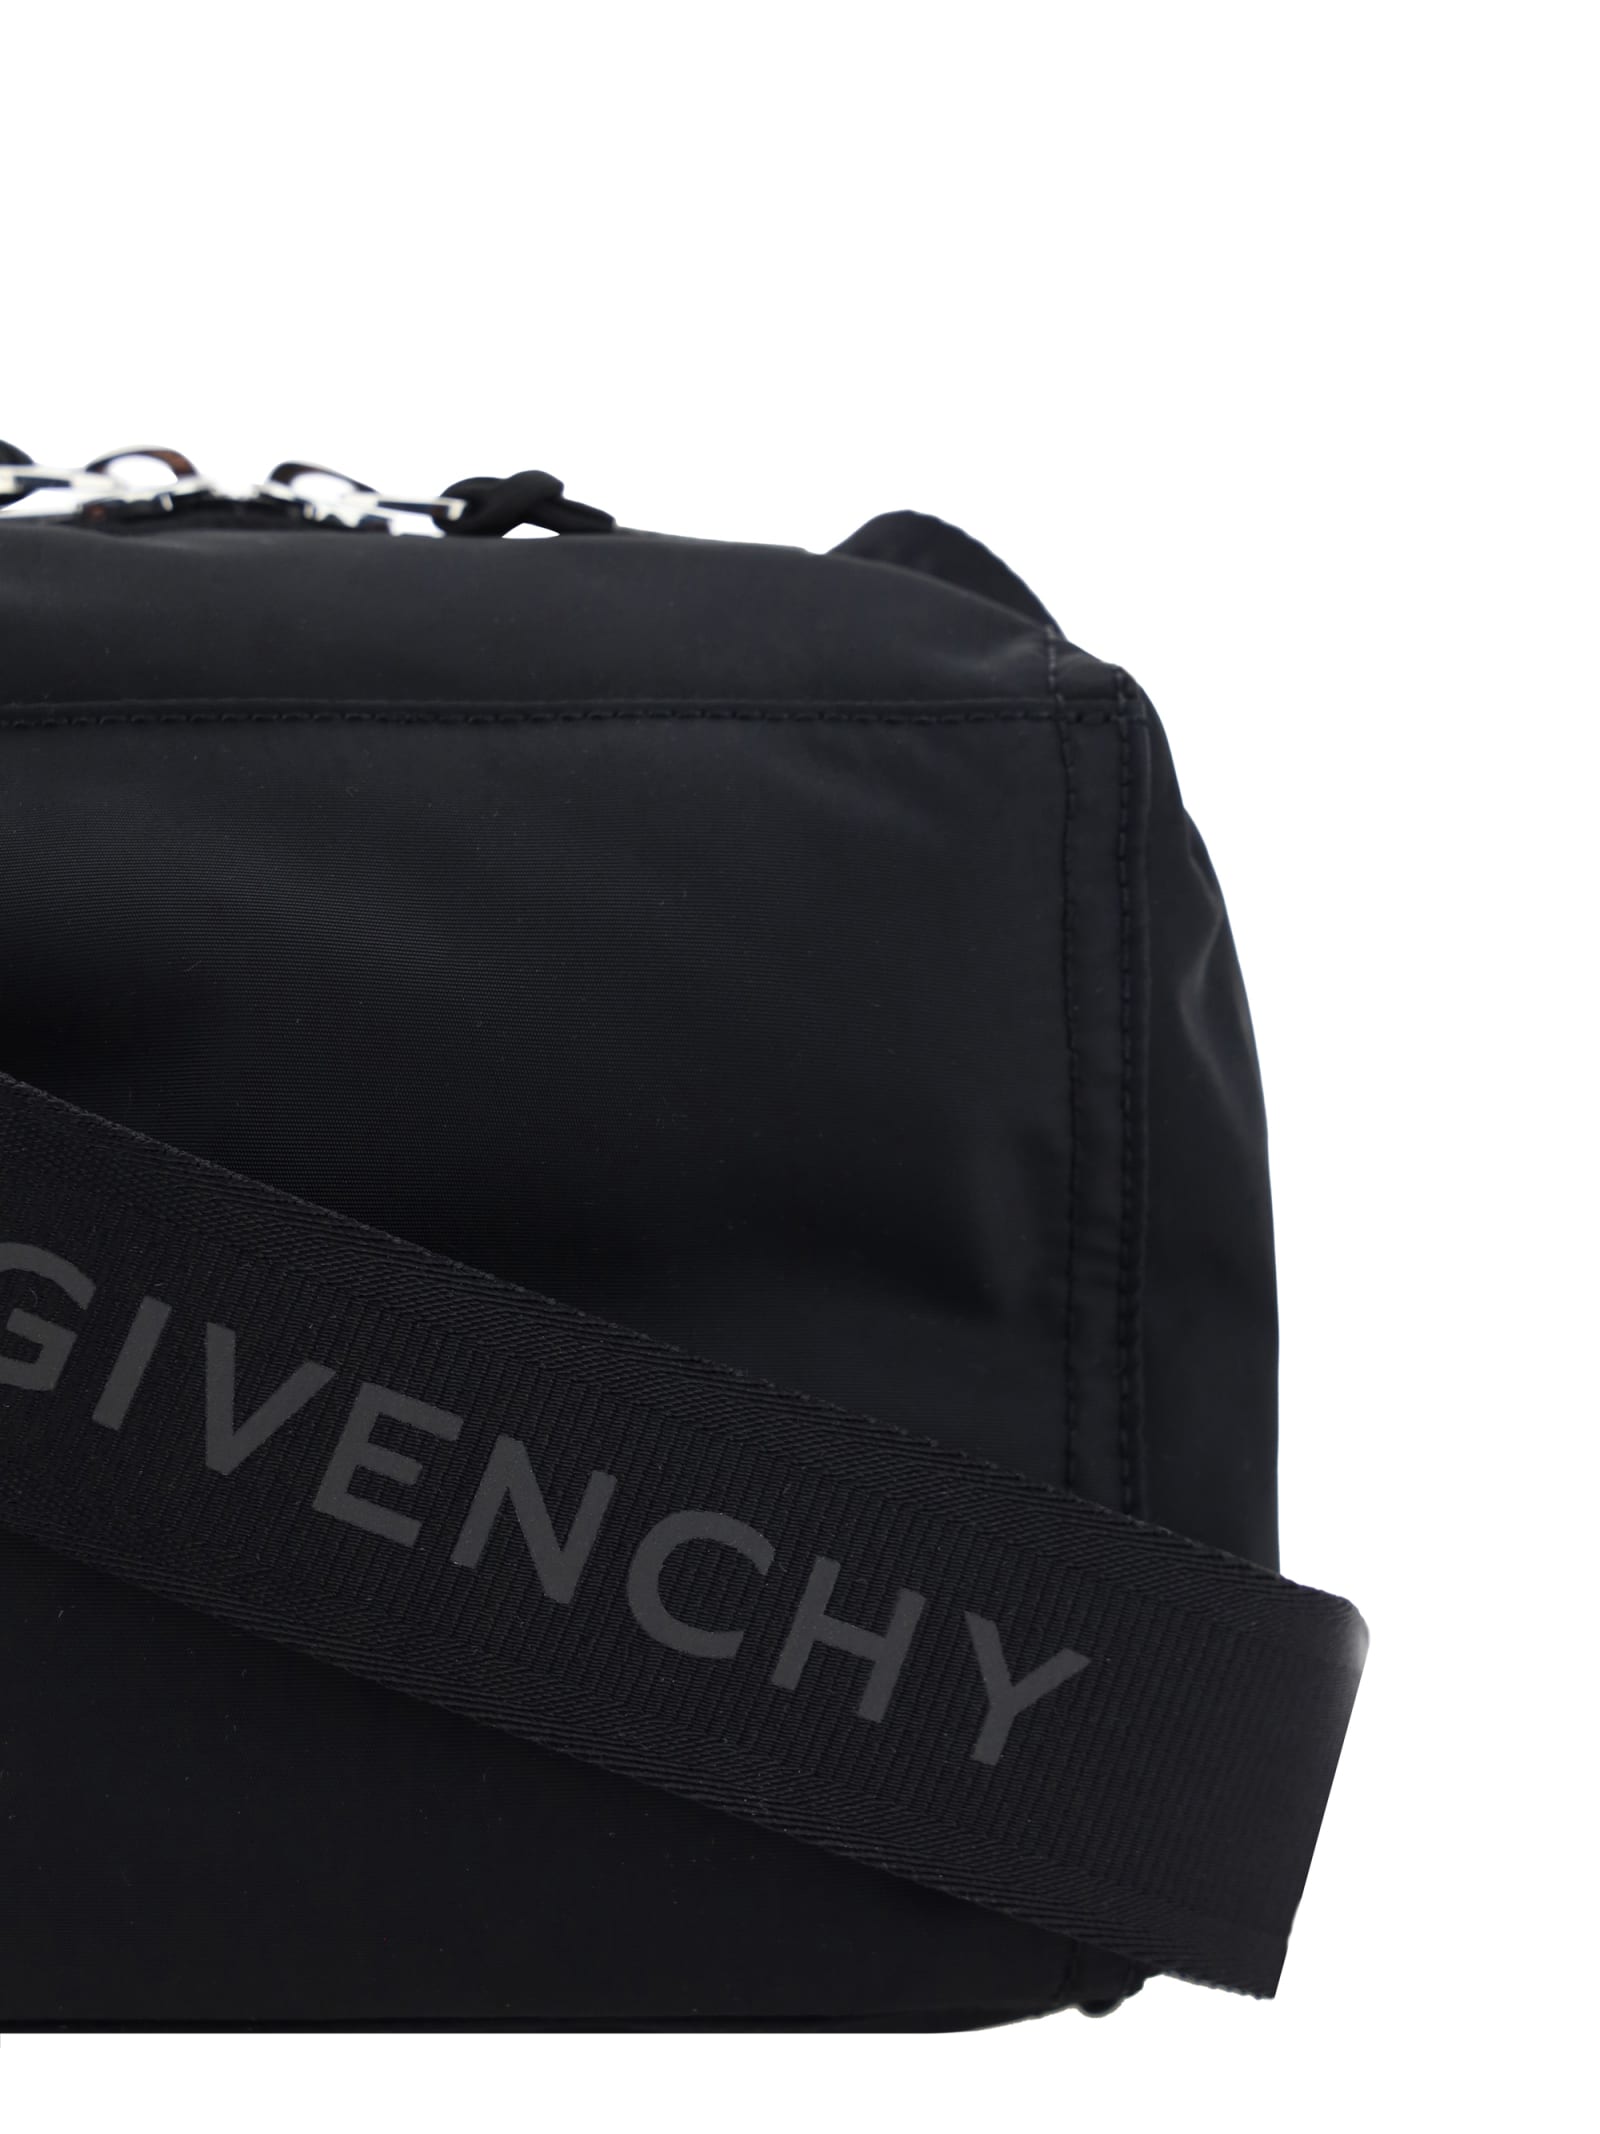 Shop Givenchy Pandora Fanny Pack In Black